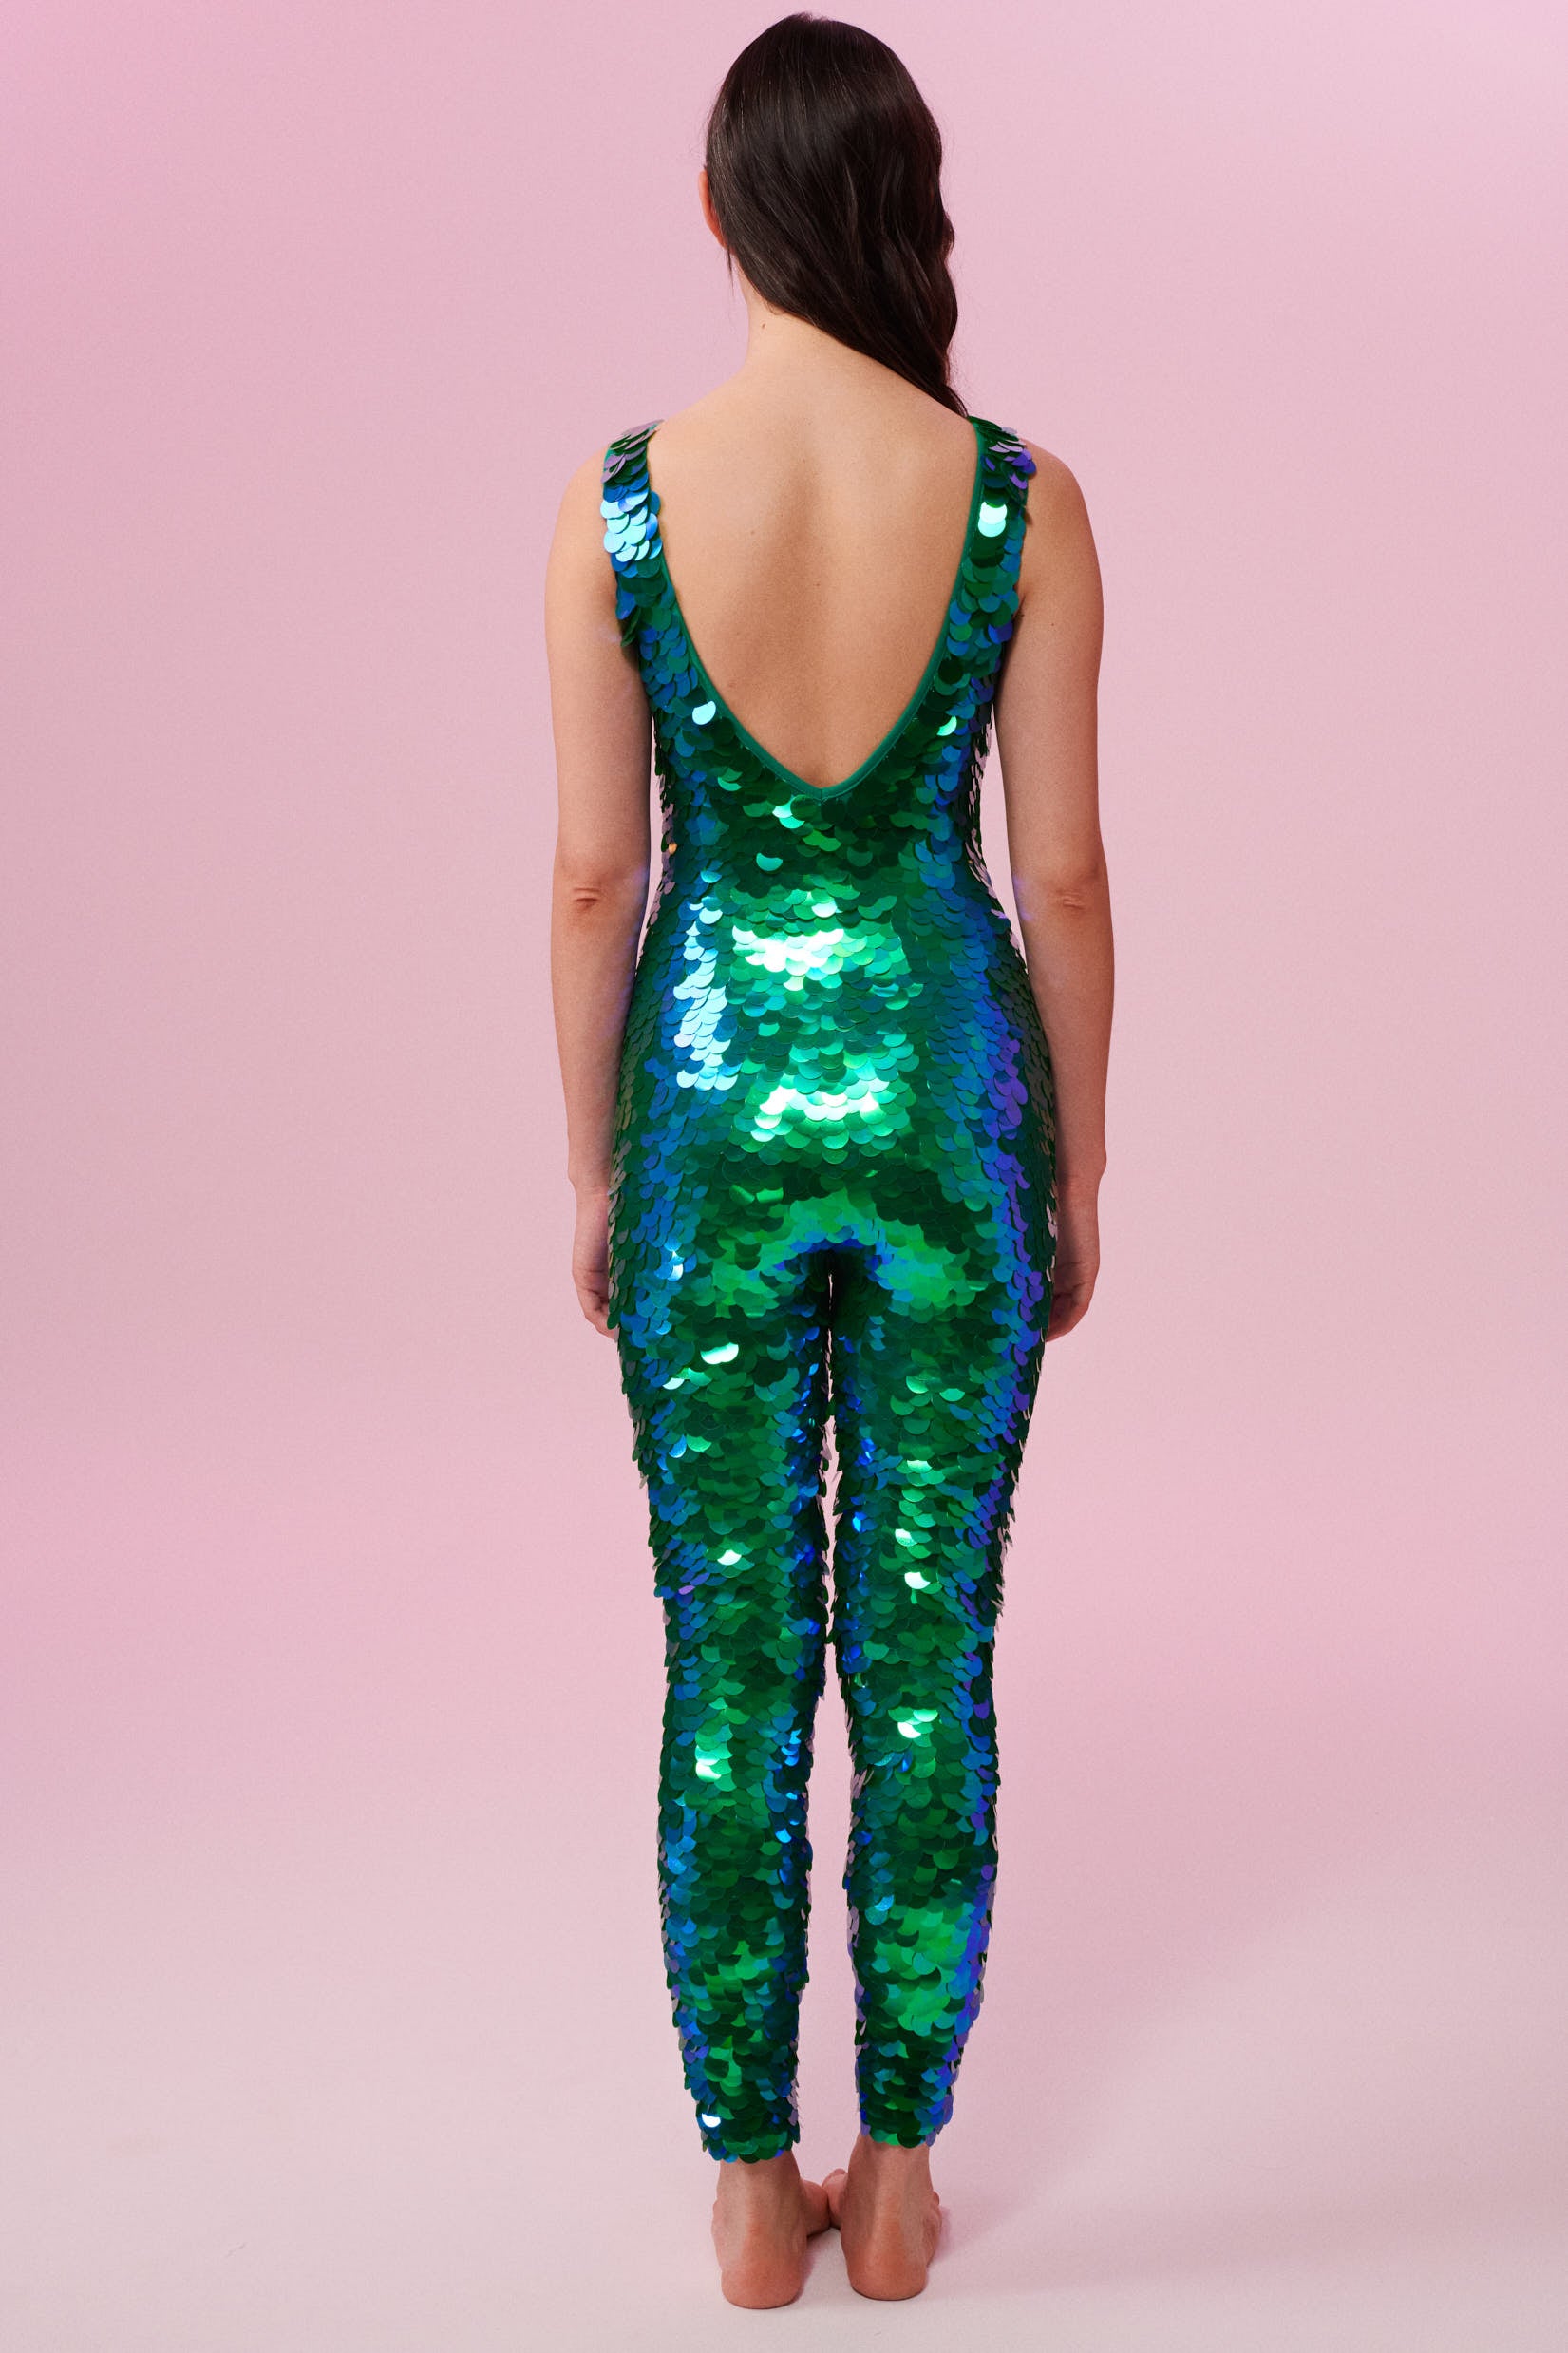 Rear view of a woman wearing an emerald sequin Rosa Bloom jumpsuit